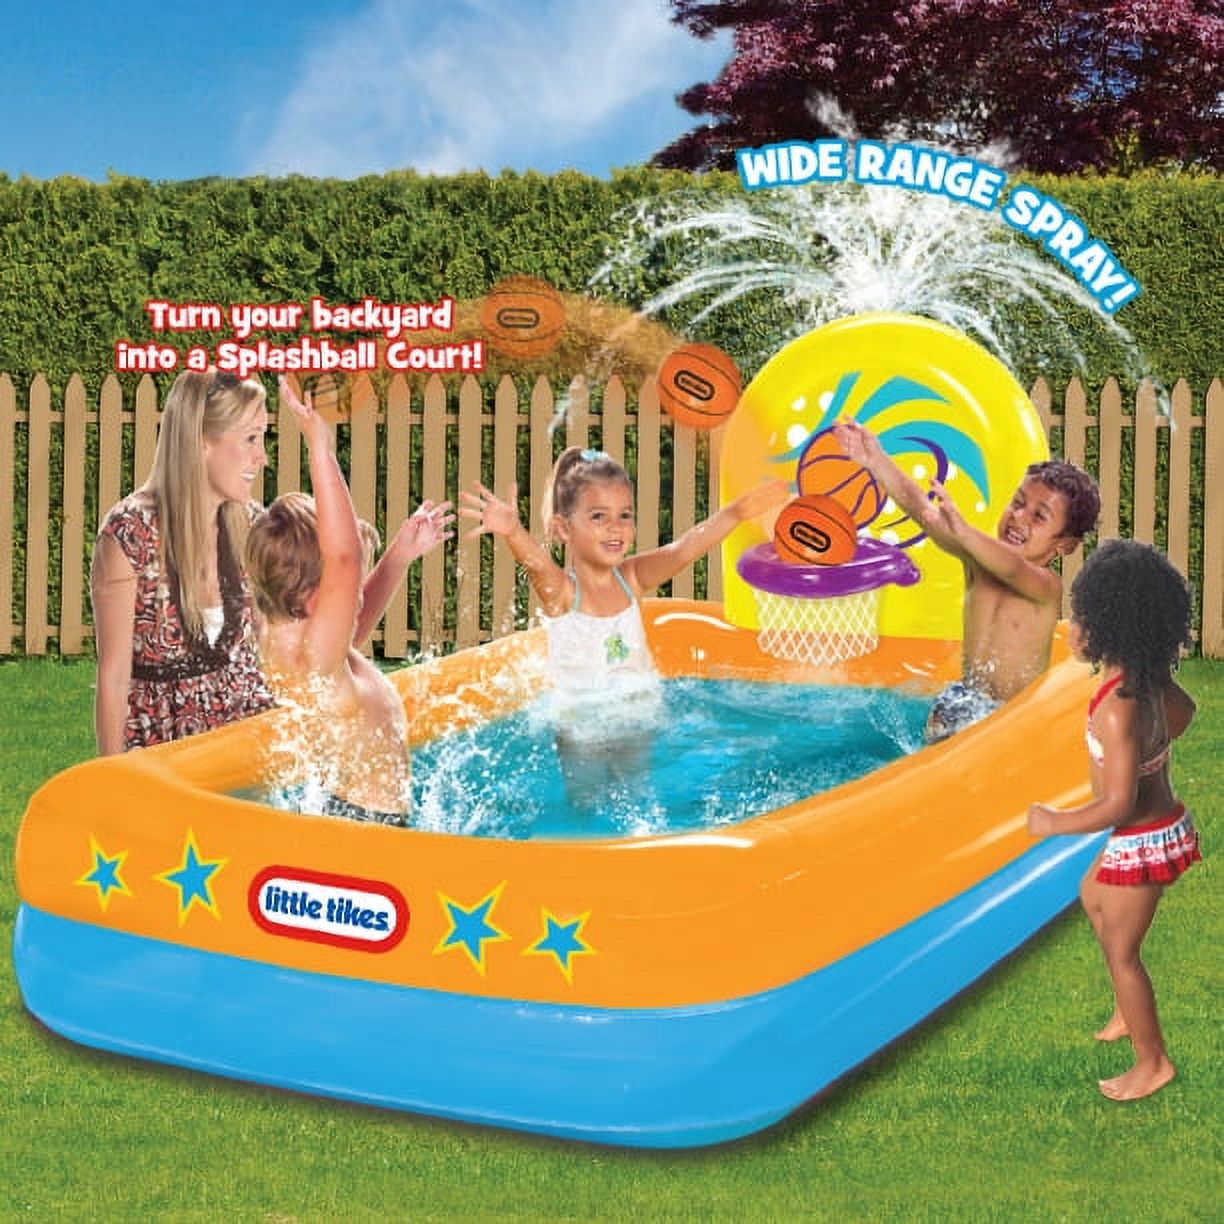 Little Tikes Splash Dunk Sprinkler Pool, Inflatable Pool with Basketball Hoop and Ball for Kids Ages 3-6 - image 1 of 5